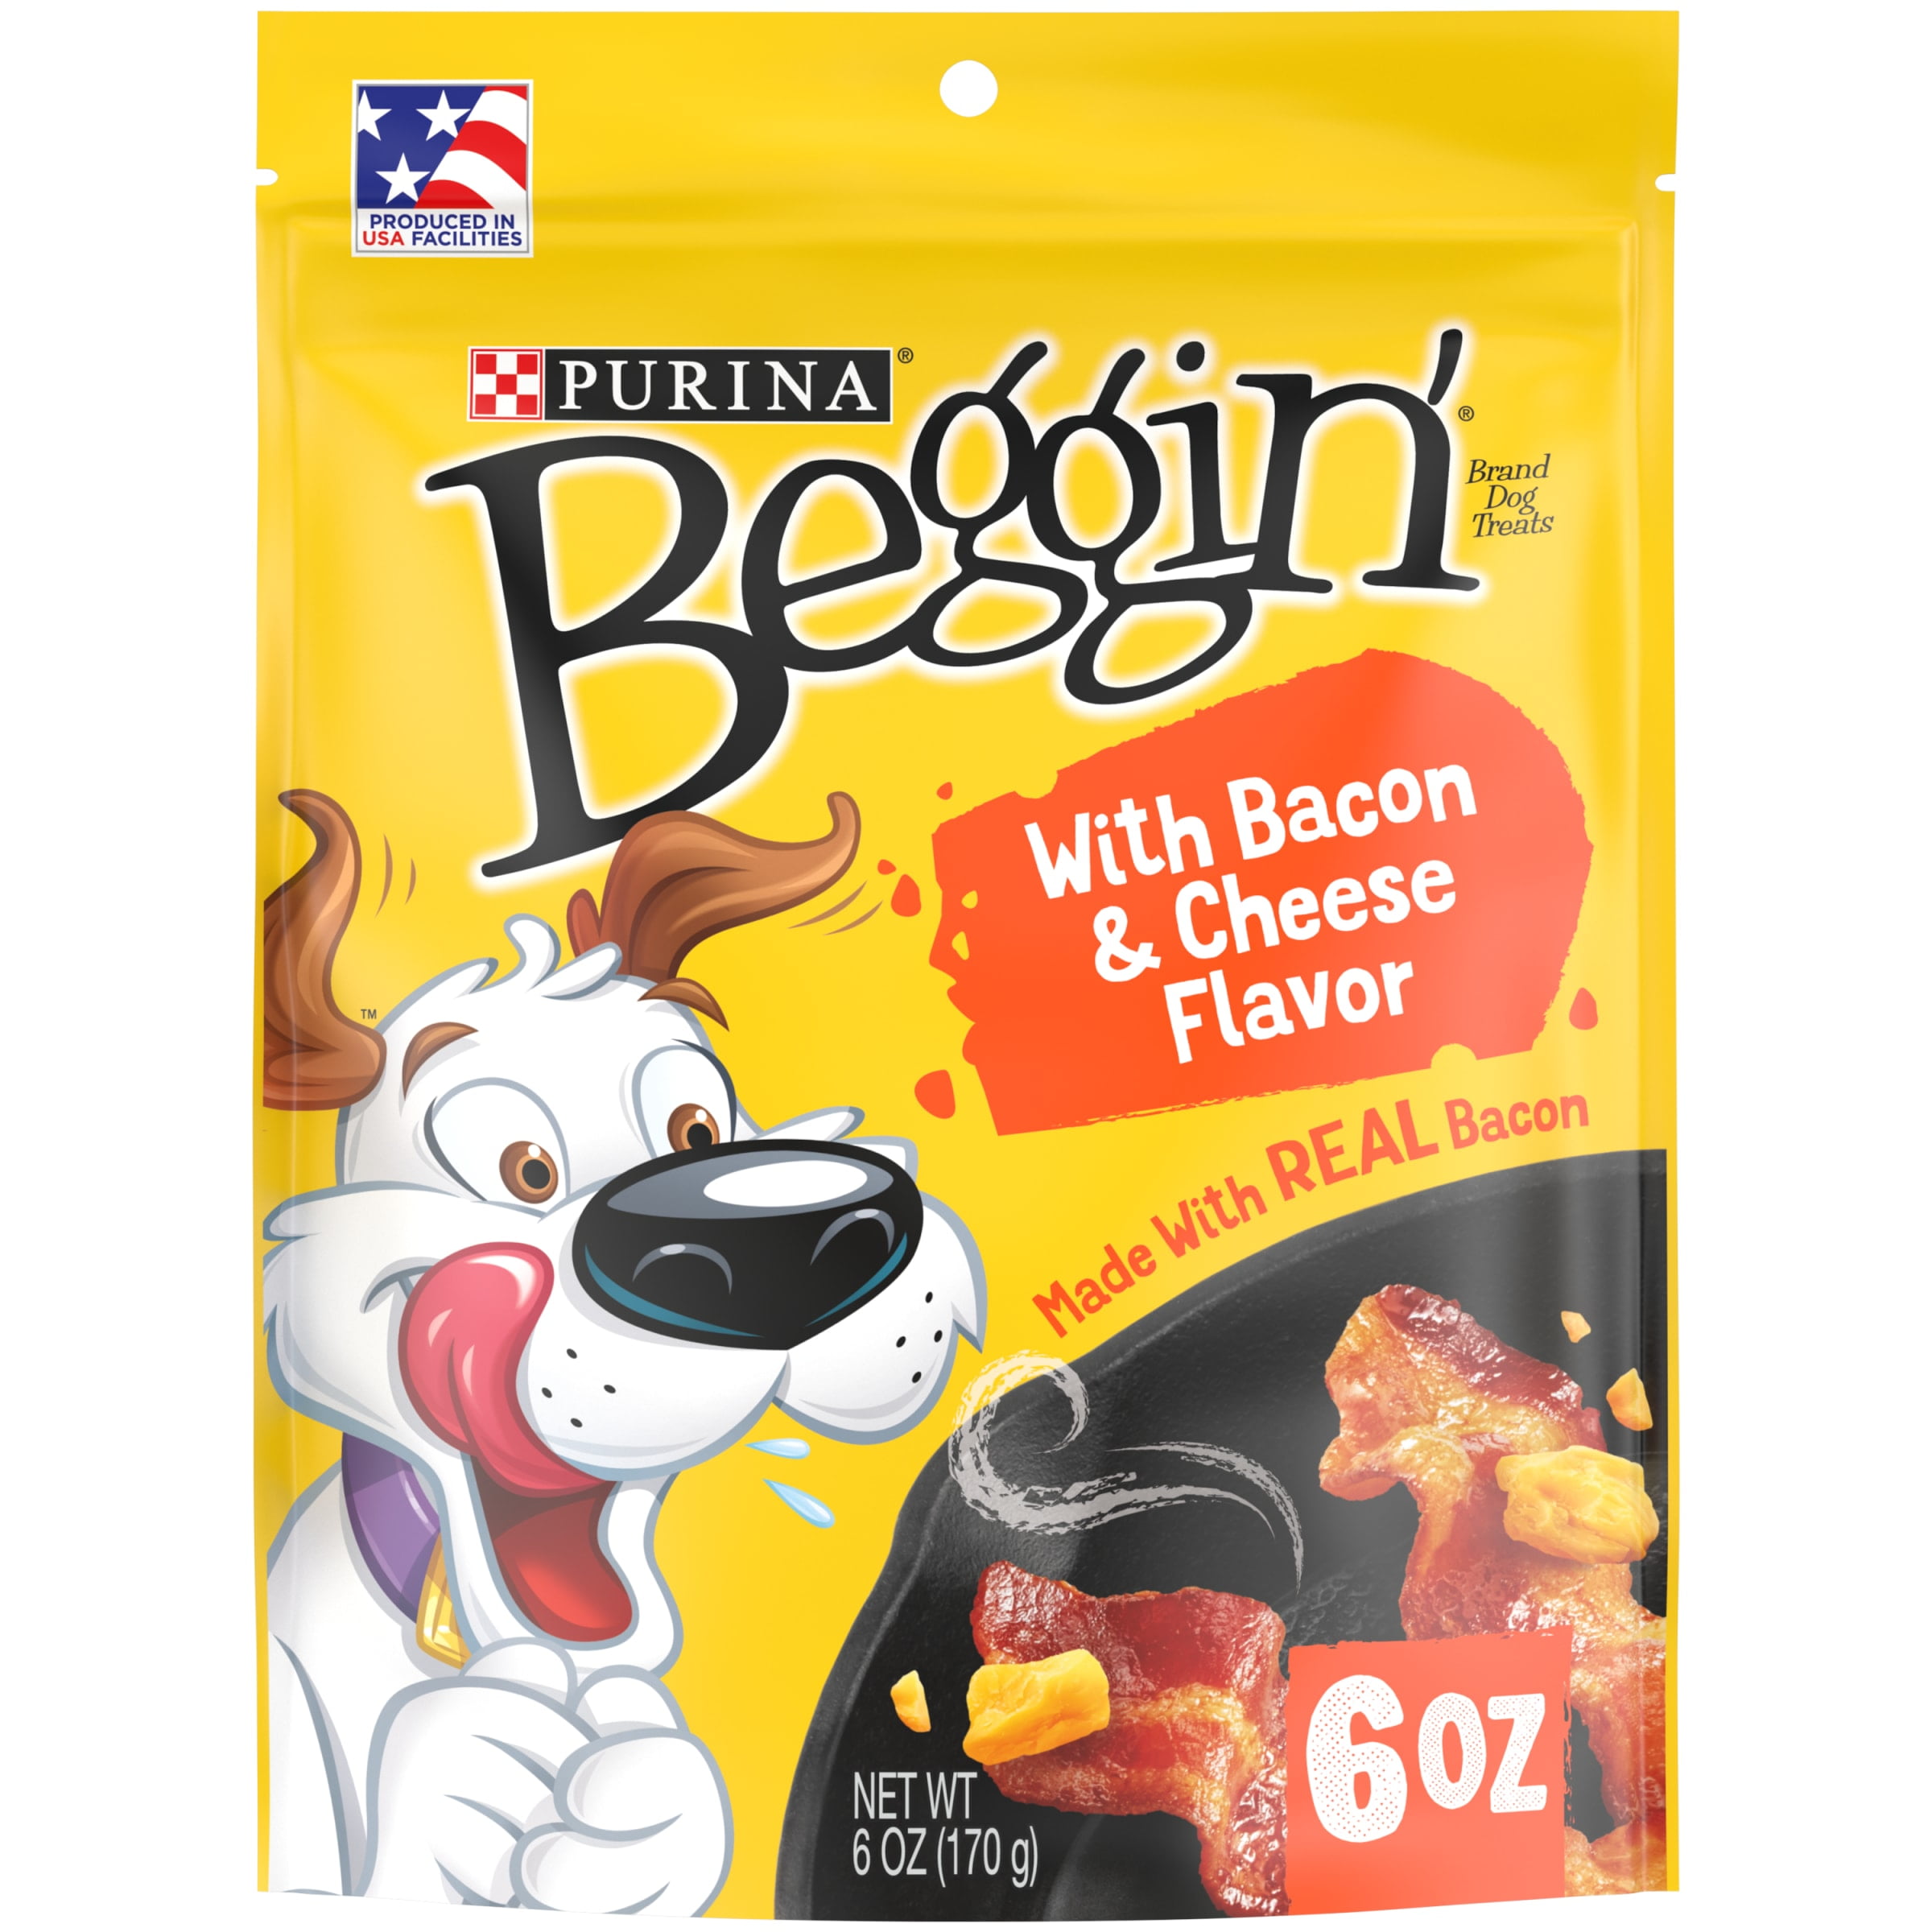 Purina Beggin' Real Meat Bacon & Cheese Treats for Dogs, 6 oz Pouch